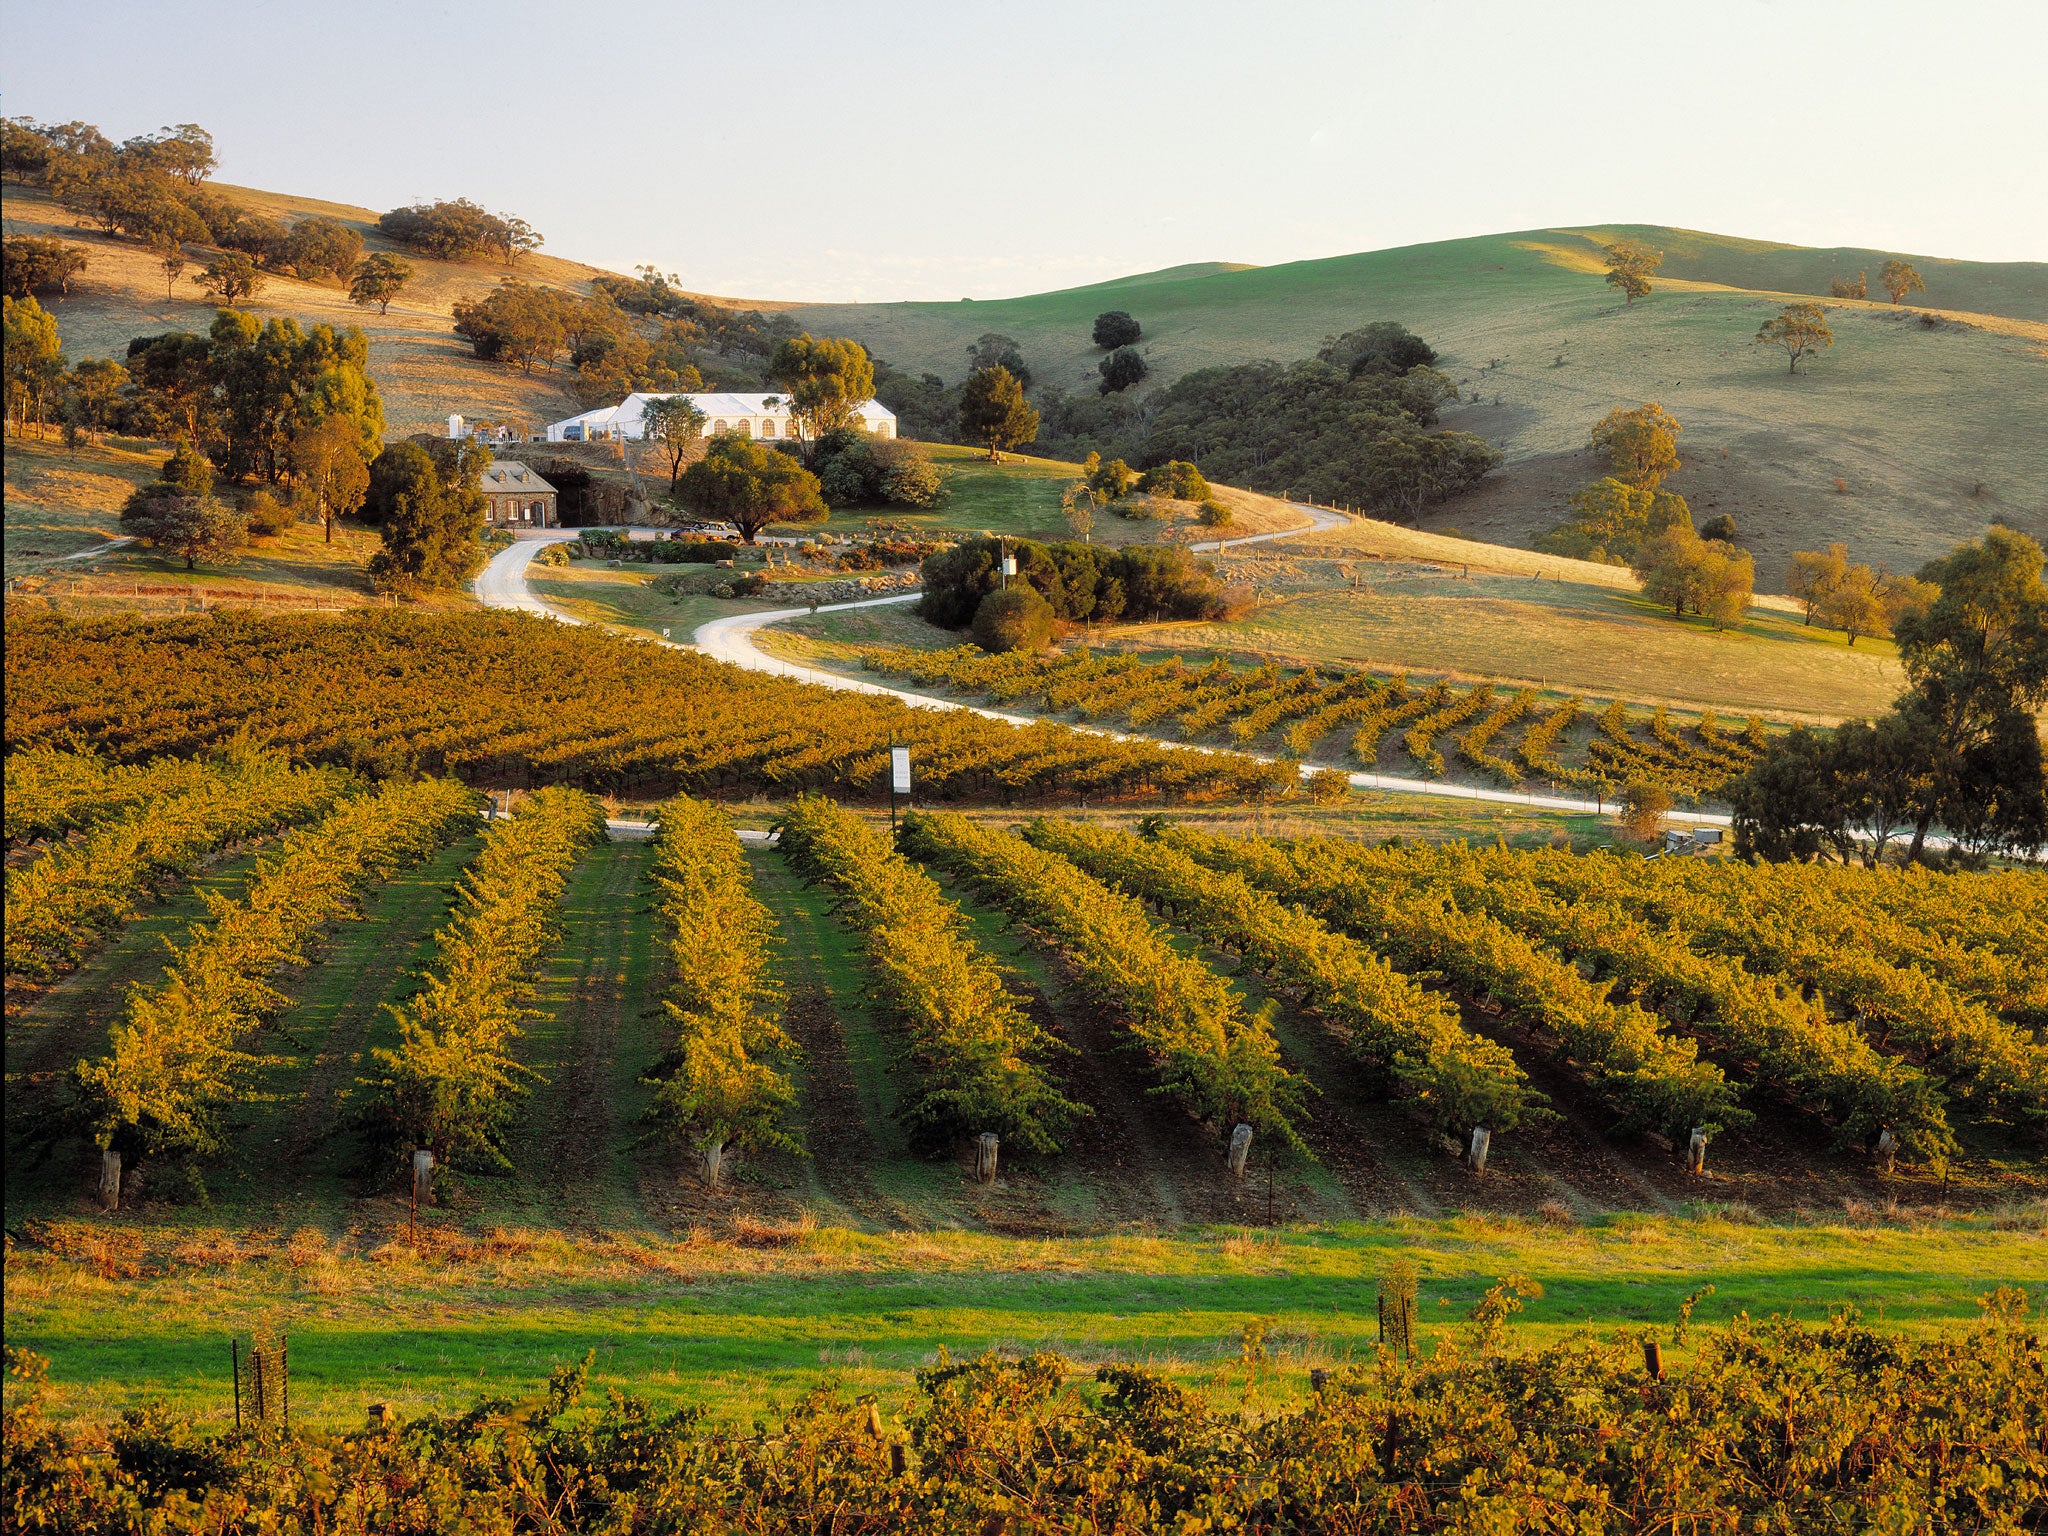 Companies are drawing on the warm climate of Barossa Valley